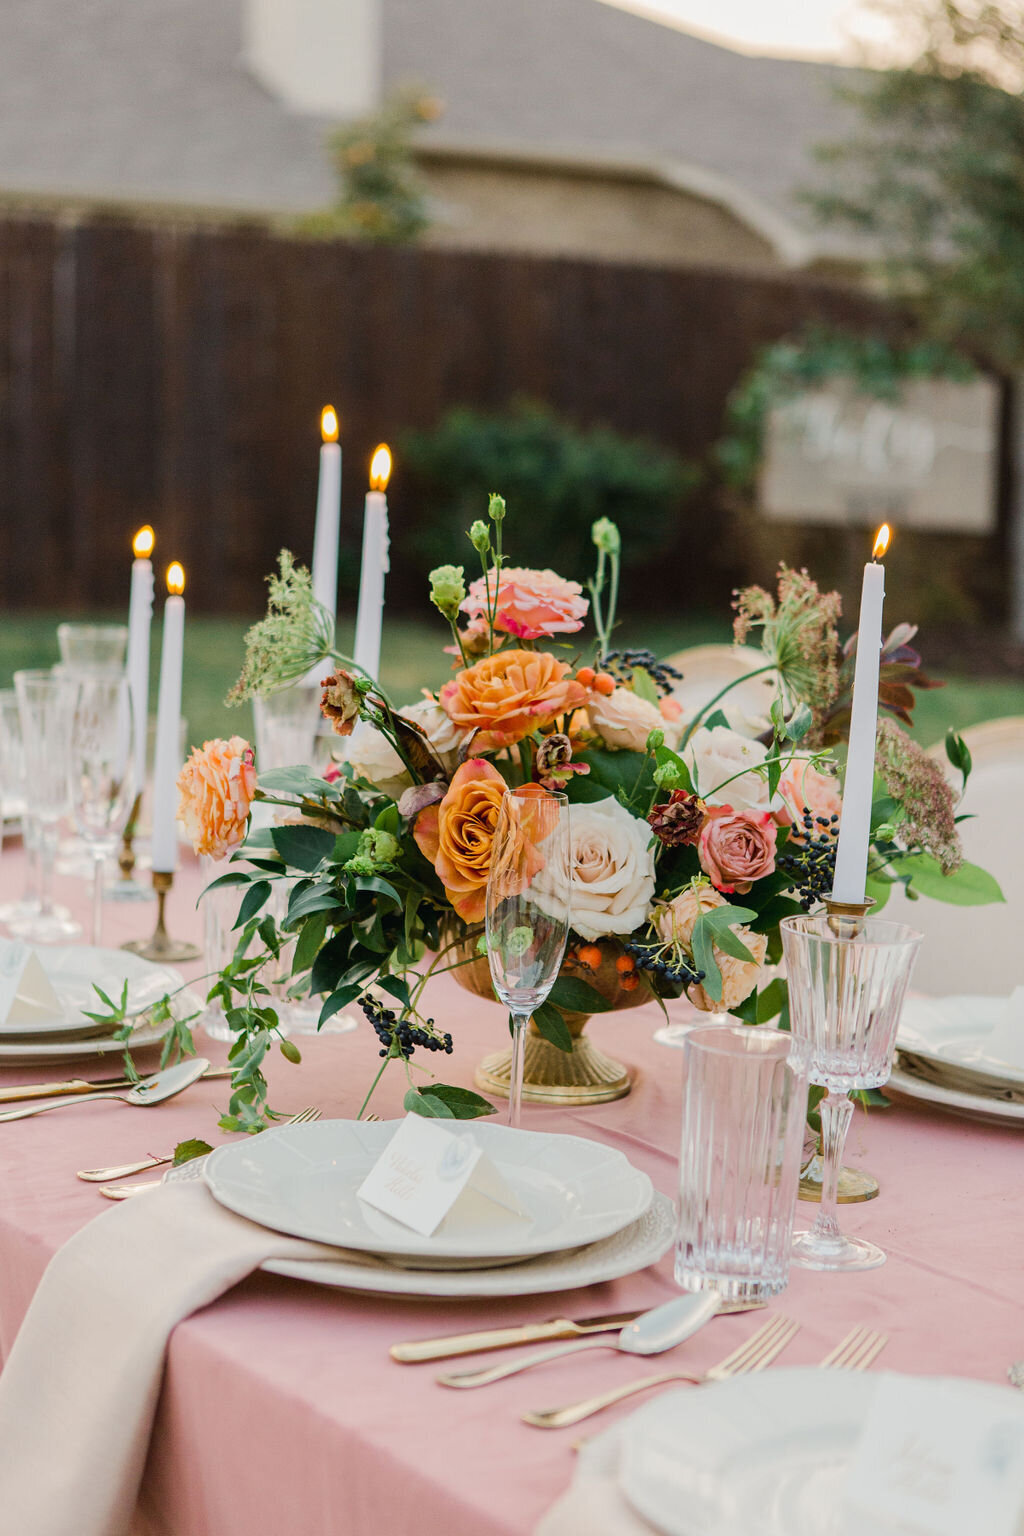 Wedding Reception Detail with organic florals by Vella Nest Floral Design